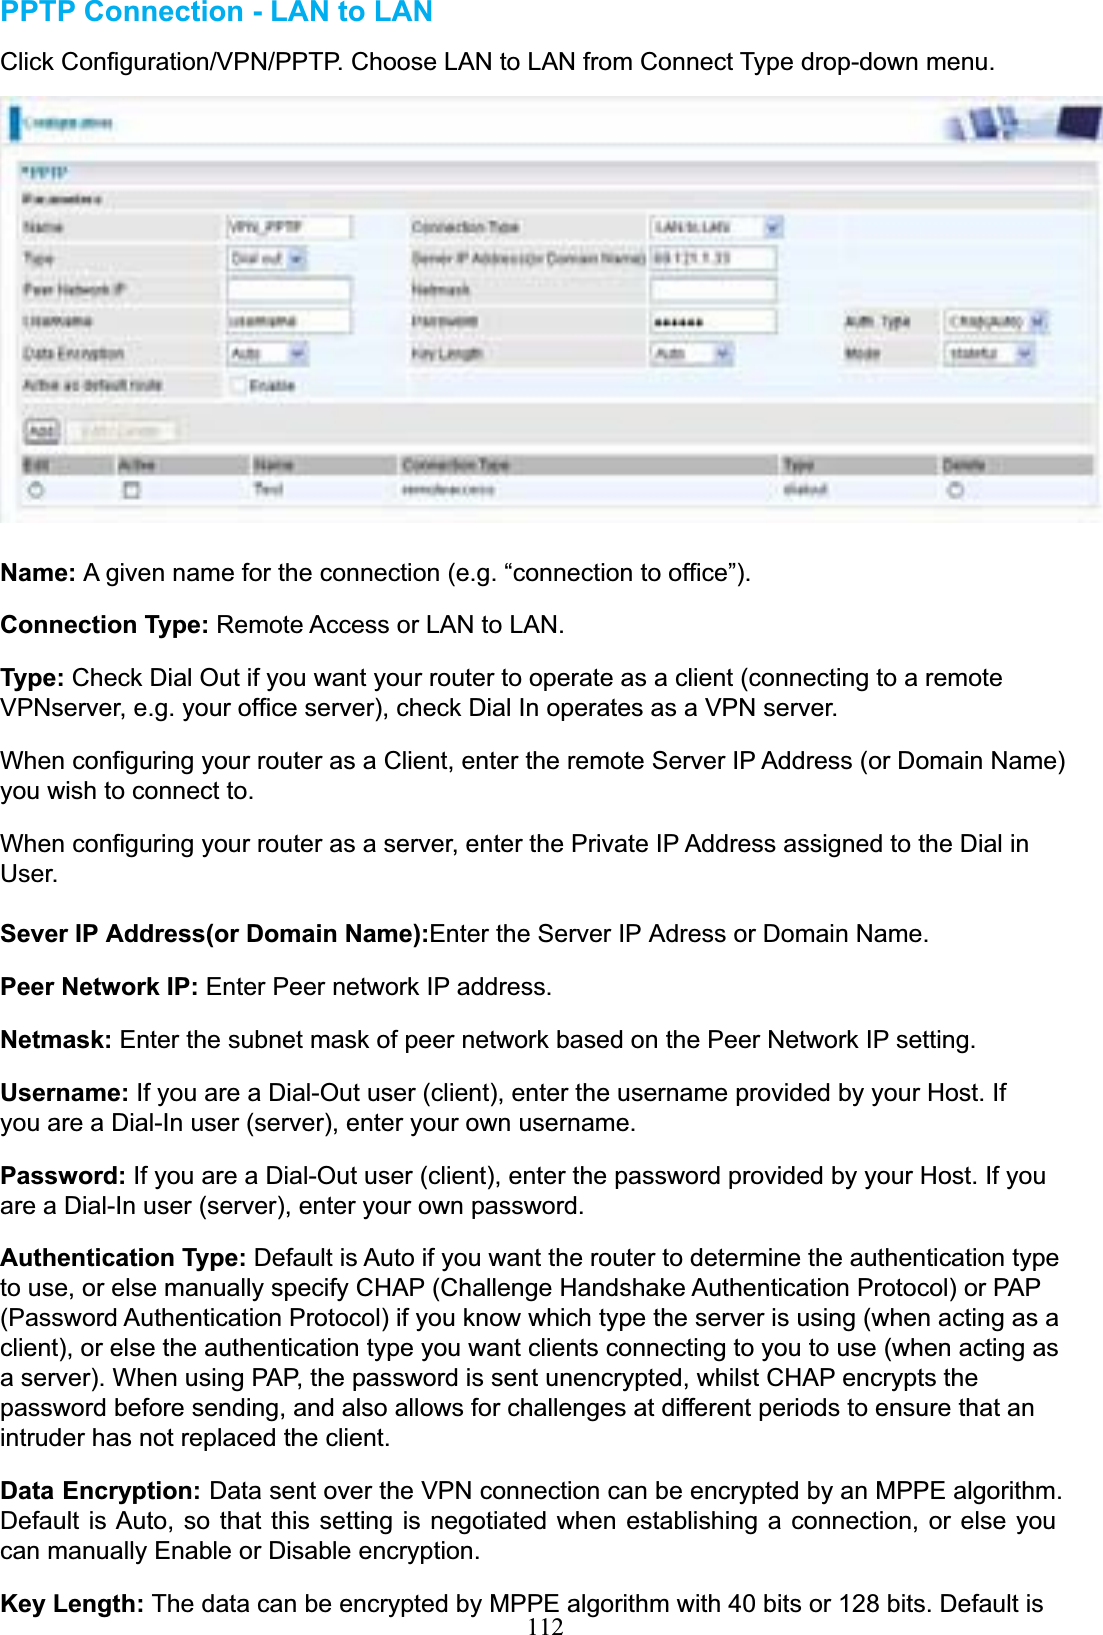 112PPTP Connection - LAN to LANClick Configuration/VPN/PPTP. Choose LAN to LAN from Connect Type drop-down menu. Name: A given name for the connection (e.g. “connection to office”). Connection Type: Remote Access or LAN to LAN. Type: Check Dial Out if you want your router to operate as a client (connecting to a remote VPNserver, e.g. your office server), check Dial In operates as a VPN server. When configuring your router as a Client, enter the remote Server IP Address (or Domain Name) you wish to connect to. When configuring your router as a server, enter the Private IP Address assigned to the Dial in User. Sever IP Address(or Domain Name):Enter the Server IP Adress or Domain Name. Peer Network IP: Enter Peer network IP address. Netmask: Enter the subnet mask of peer network based on the Peer Network IP setting. Username: If you are a Dial-Out user (client), enter the username provided by your Host. If you are a Dial-In user (server), enter your own username. Password: If you are a Dial-Out user (client), enter the password provided by your Host. If you are a Dial-In user (server), enter your own password. Authentication Type: Default is Auto if you want the router to determine the authentication type to use, or else manually specify CHAP (Challenge Handshake Authentication Protocol) or PAP (Password Authentication Protocol) if you know which type the server is using (when acting as a client), or else the authentication type you want clients connecting to you to use (when acting as a server). When using PAP, the password is sent unencrypted, whilst CHAP encrypts the password before sending, and also allows for challenges at different periods to ensure that an intruder has not replaced the client. Data Encryption: Data sent over the VPN connection can be encrypted by an MPPE algorithm. Default is Auto, so that this setting is negotiated when establishing a connection, or else you can manually Enable or Disable encryption. Key Length: The data can be encrypted by MPPE algorithm with 40 bits or 128 bits. Default is 